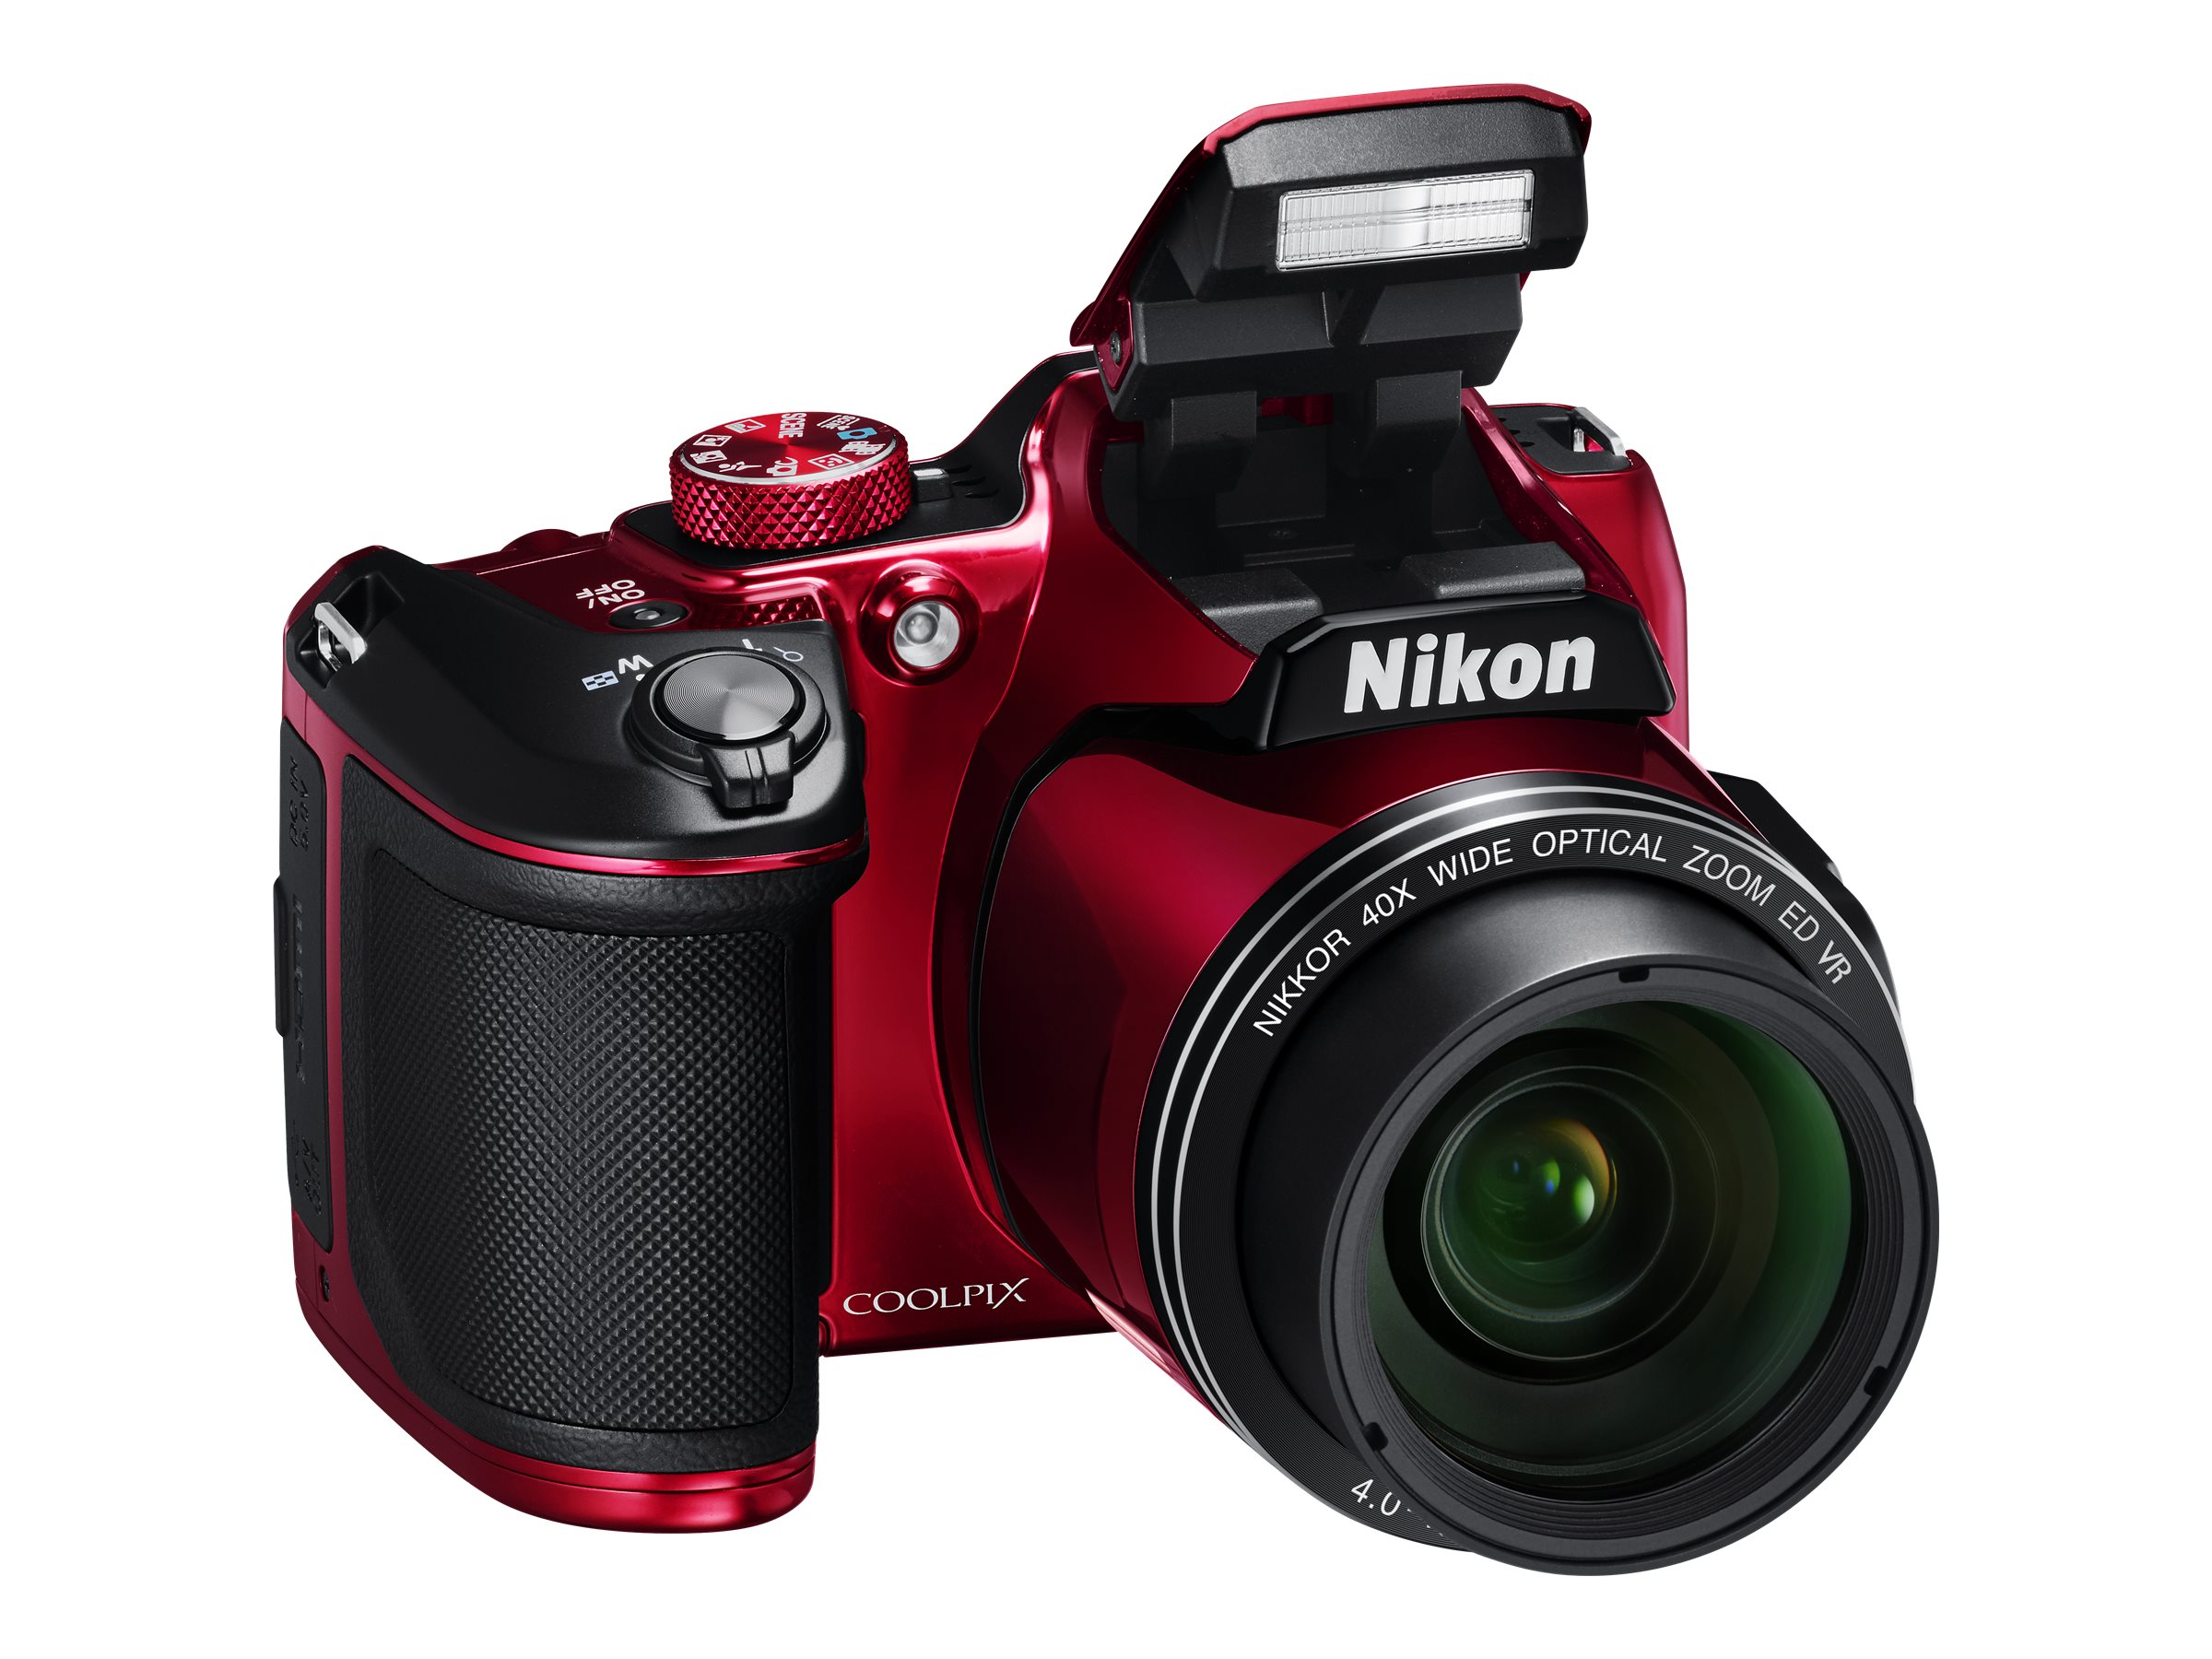 Nikon Red COOLPIX B500 Digital Camera with 16 Megapixels and 40x Optical Zoom - image 5 of 11